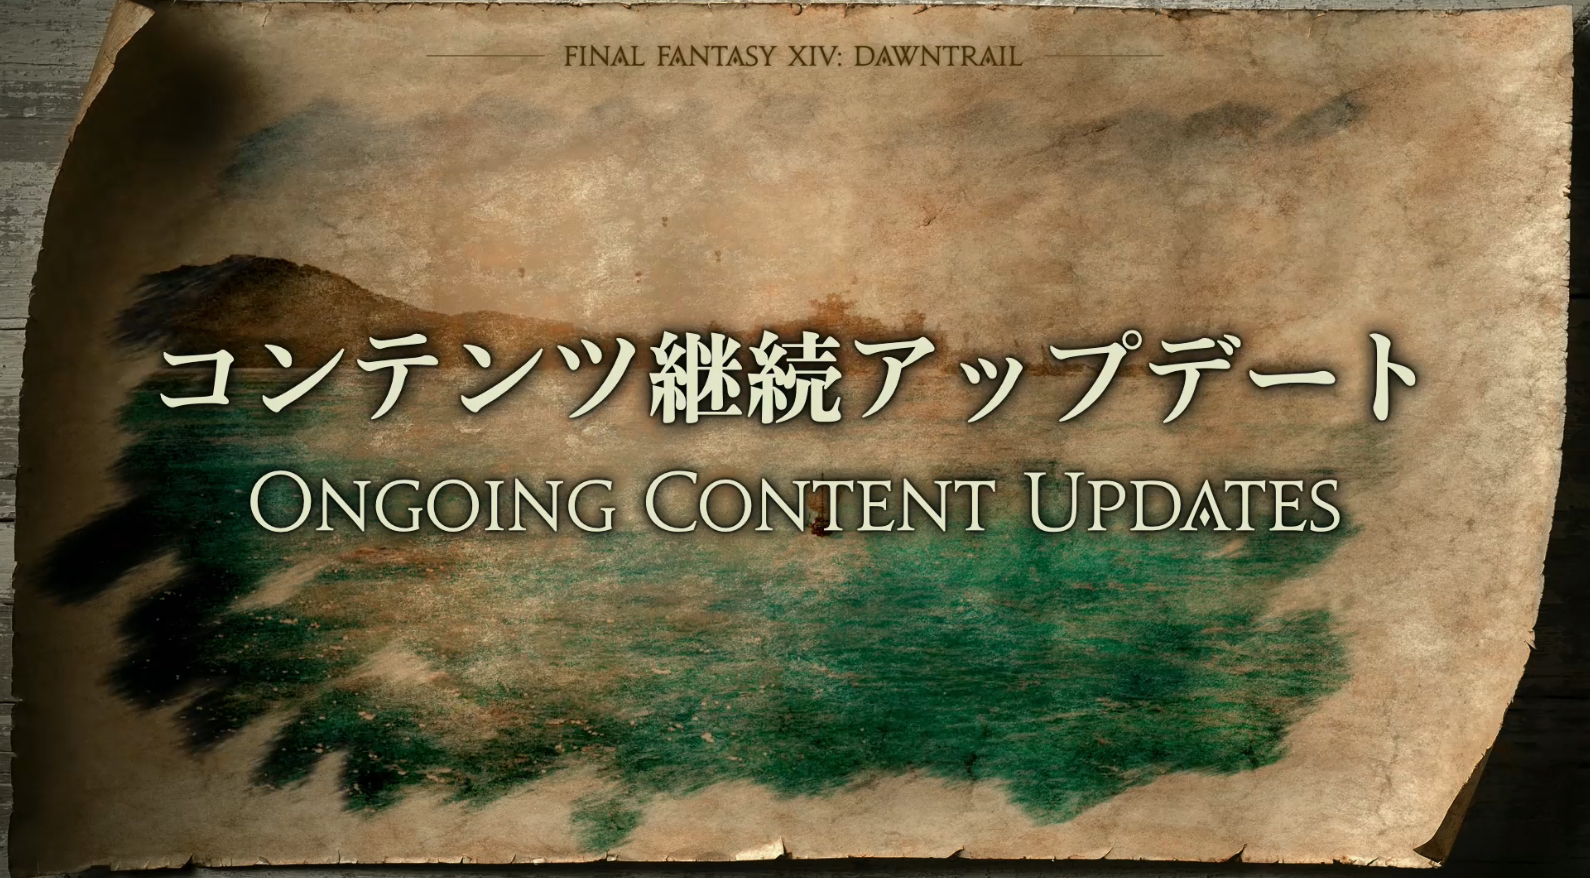 Ongoing Content Updates Dawntrail FFXIV